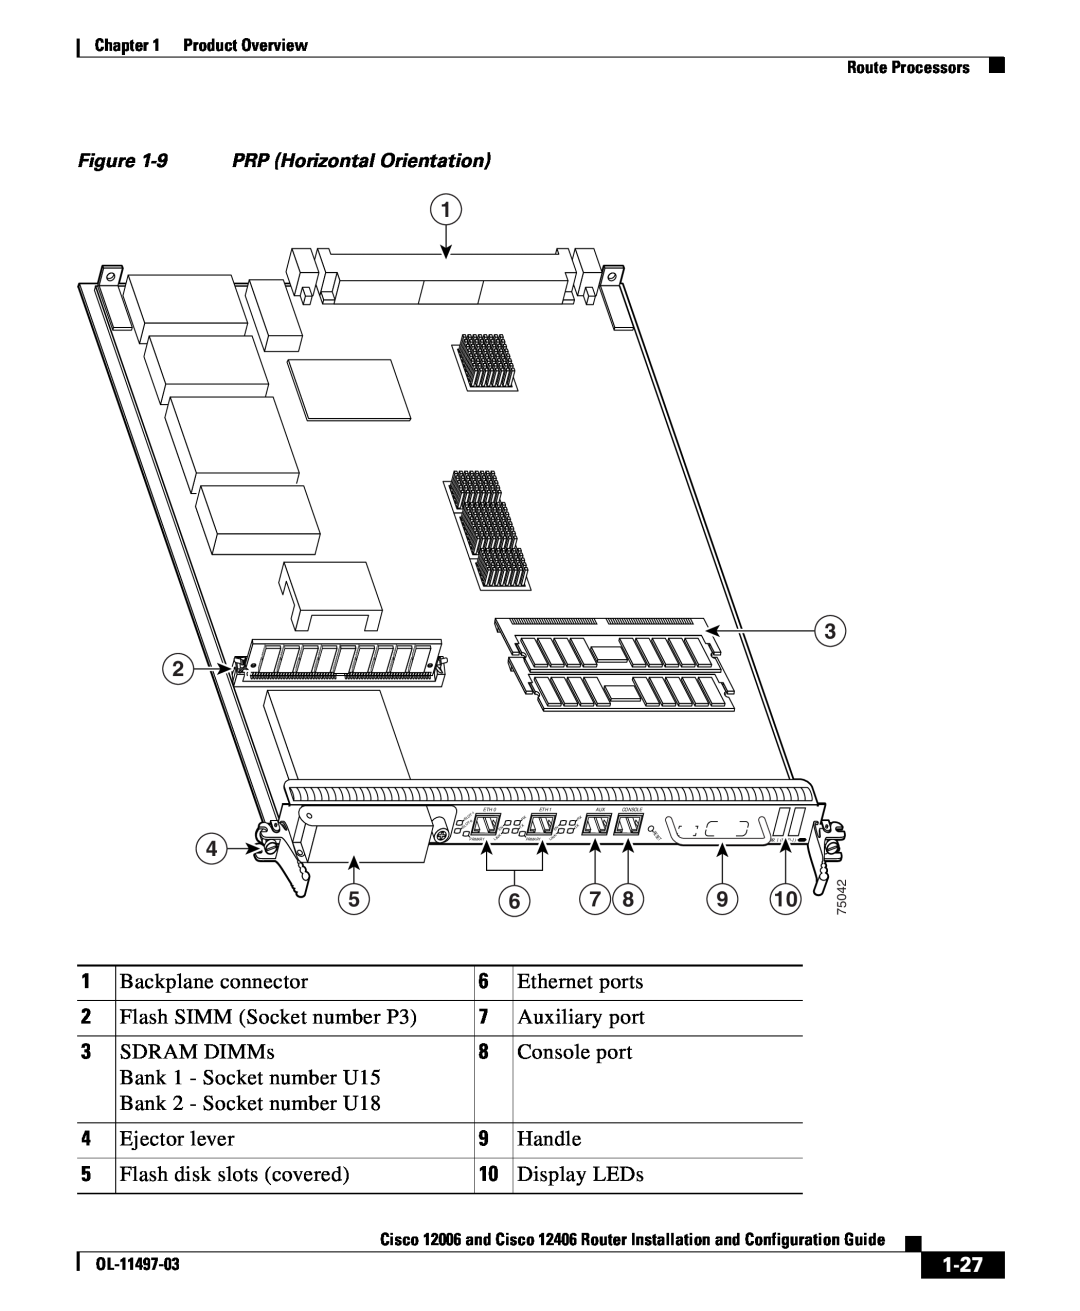 Cisco Systems 12006 series, 12406 series manual 1-27, Backplane connector 